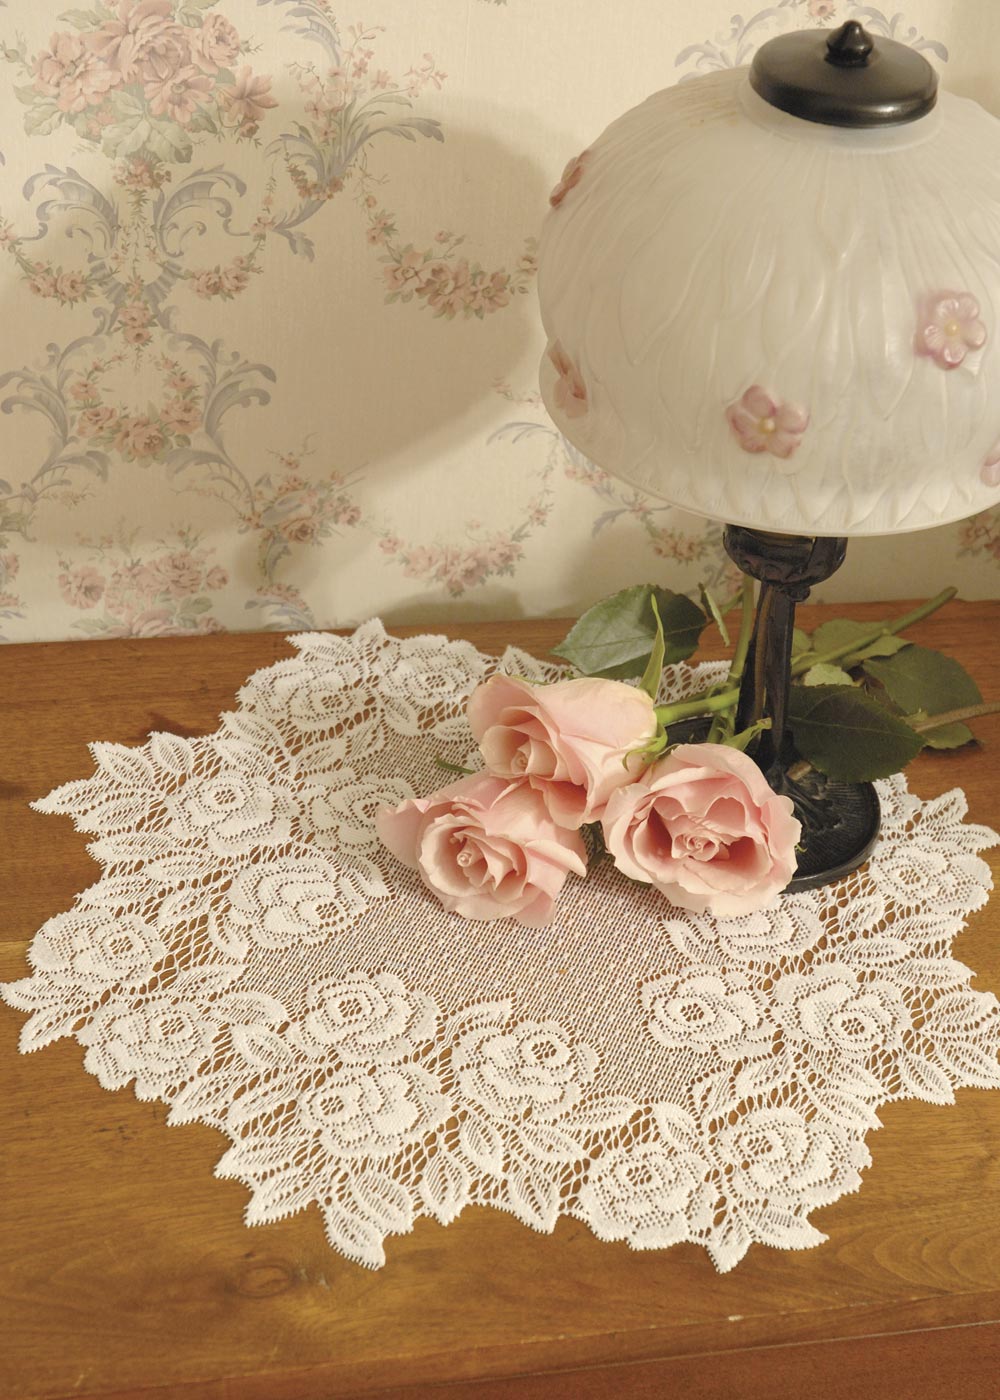 HERITAGE LACE WHITE ROSES DOILY 17 INCHES BEAUTIFUL ITEM 3086 